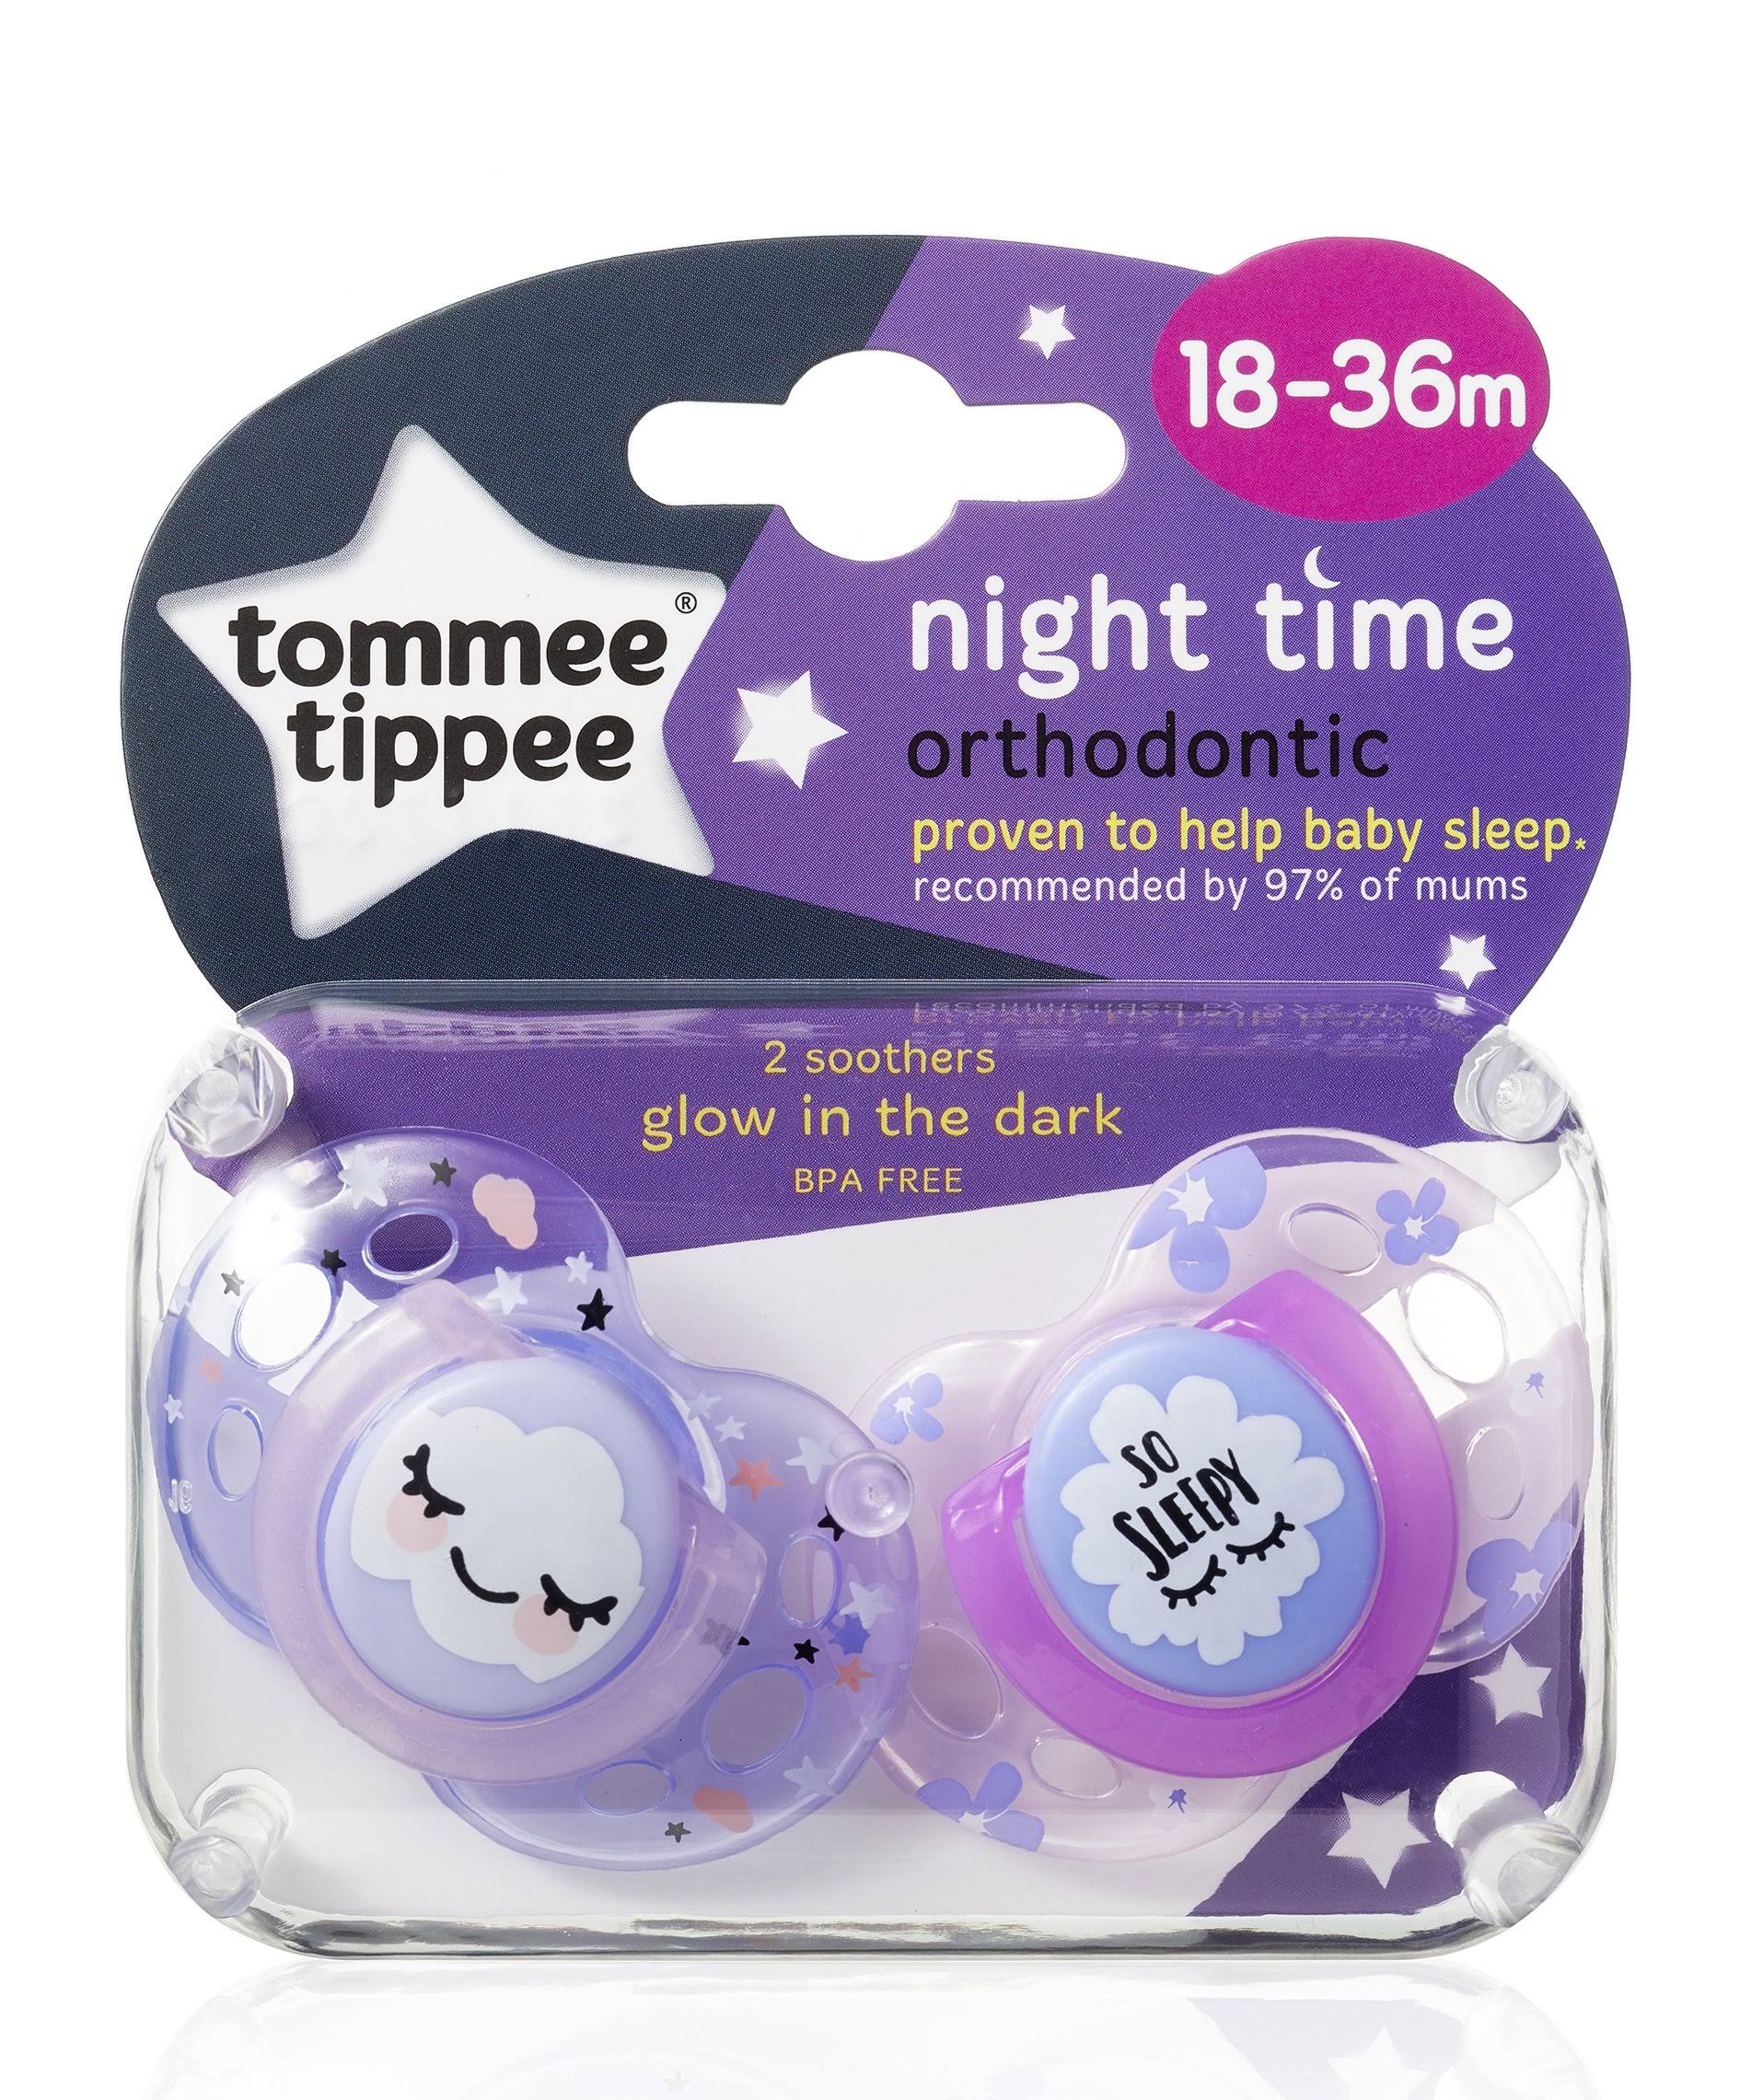 Tommee Tippee Night Time Orthodontic Soothers - 18-36 Months, 2pcs